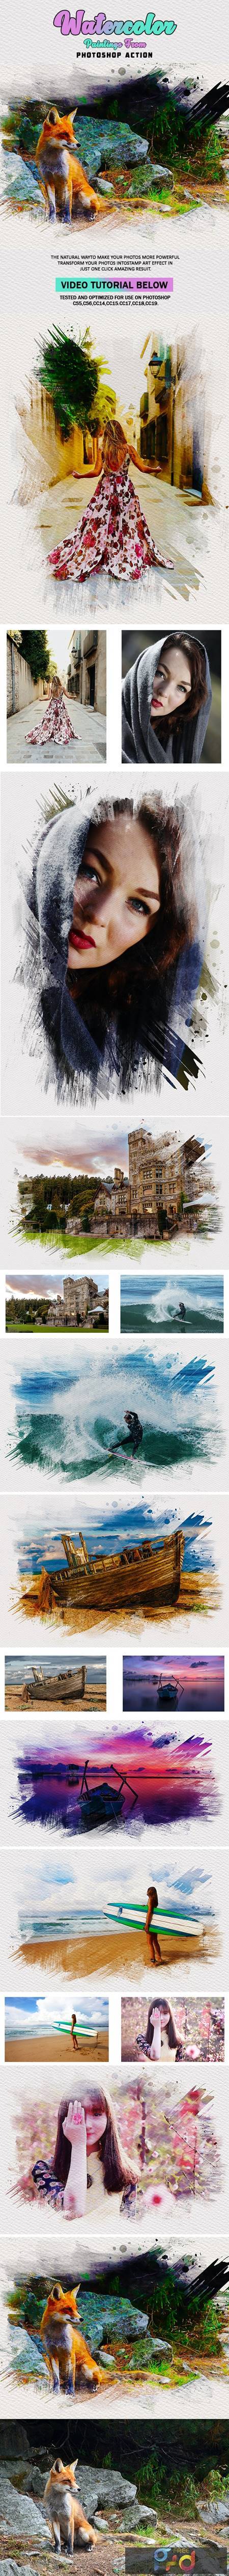 Watercolor Paintings From Photoshop Actions 26086825 1